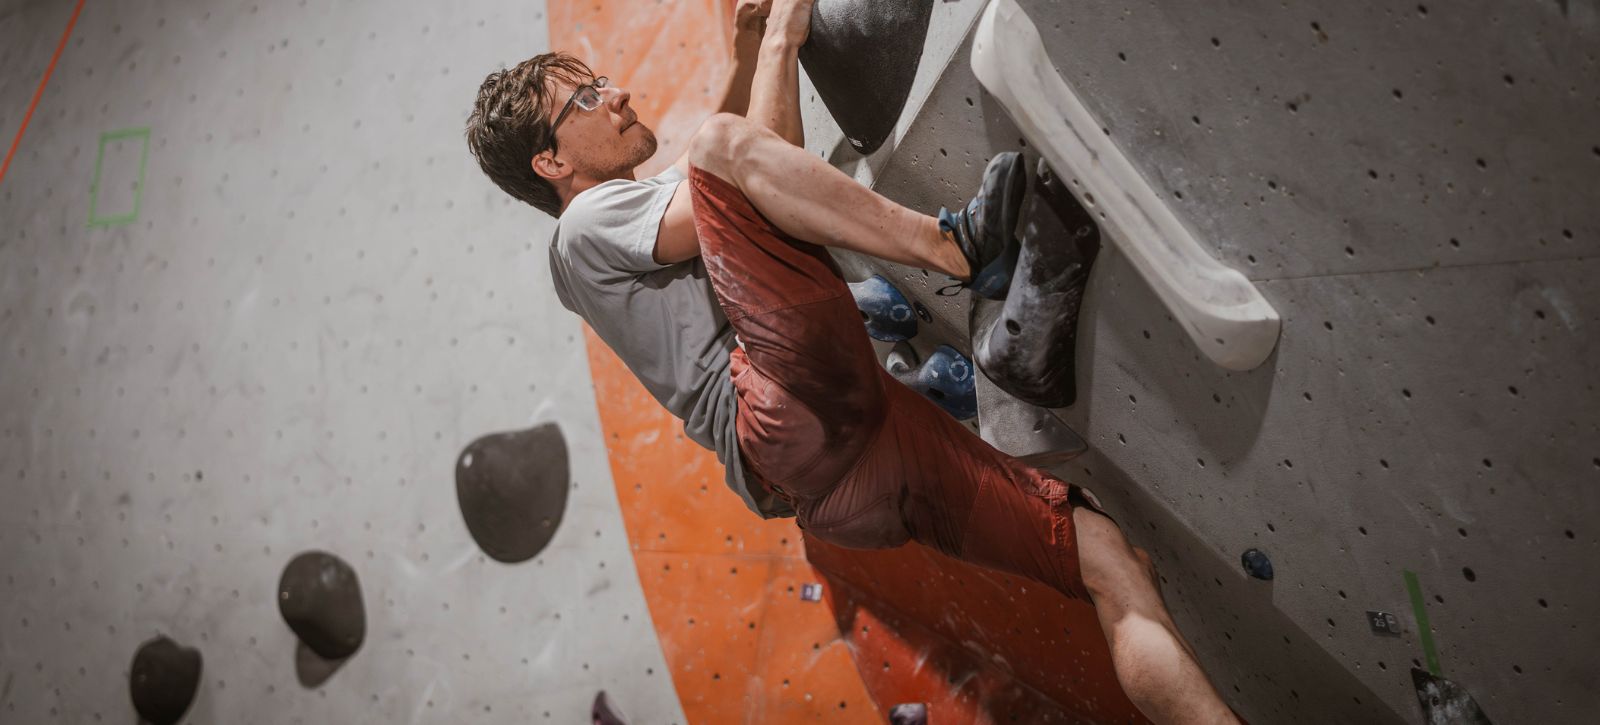 A man steps up very high while bouldering. He holds a sloper